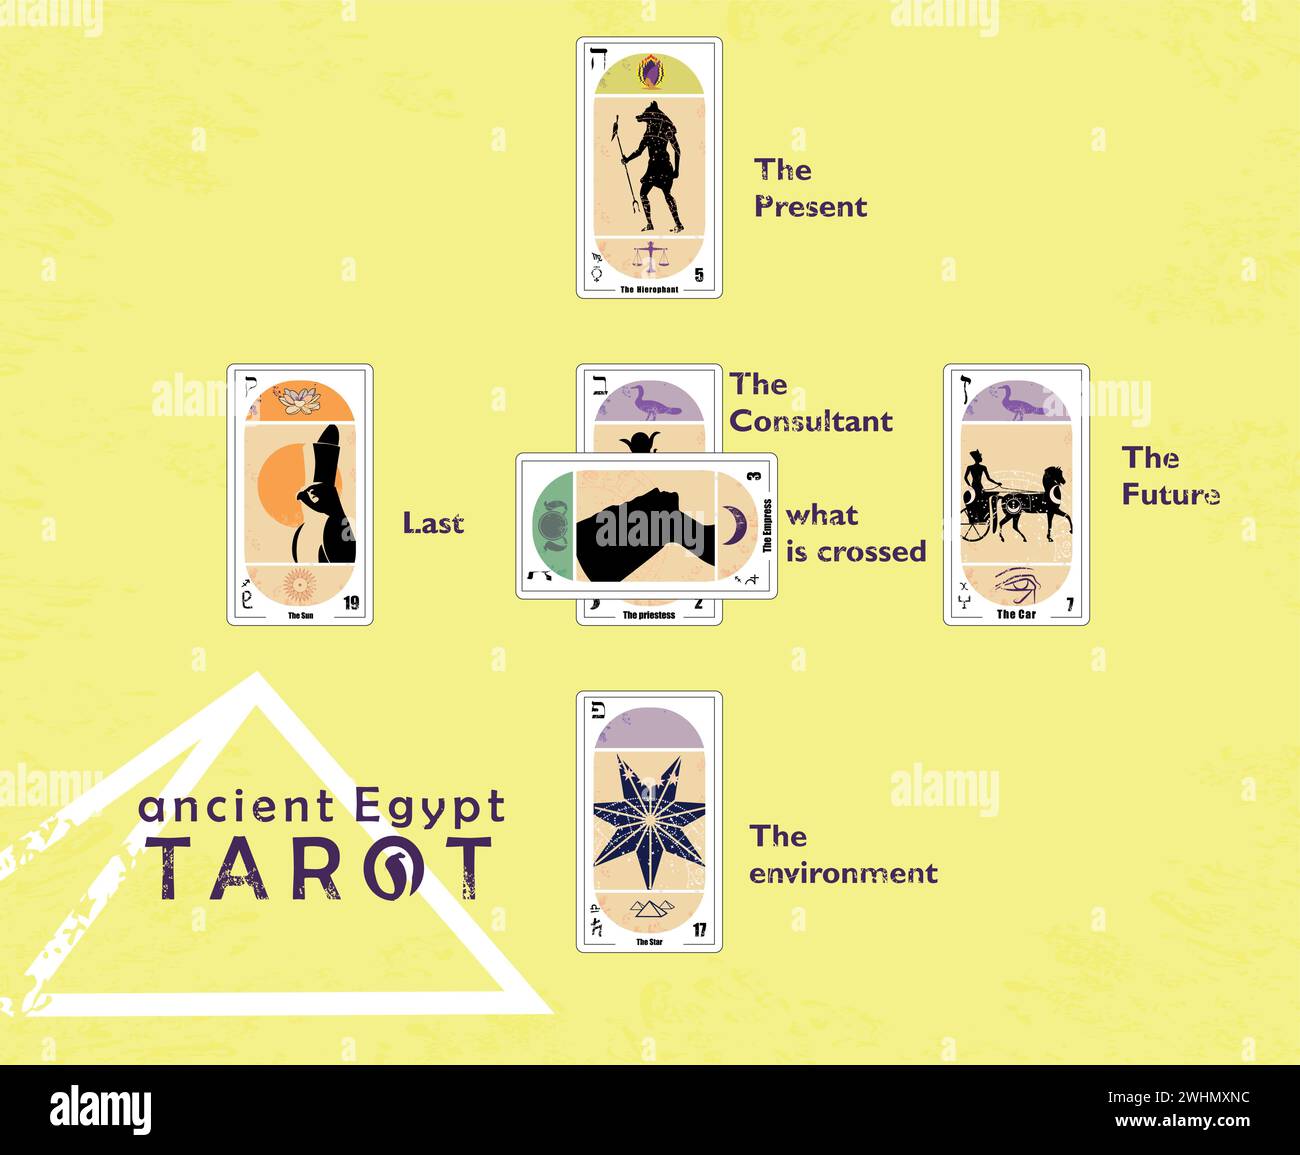 Ancient Egyptian Tarot. Layout of various tarot cards in a card spread example on sand colored background. Stock Vector